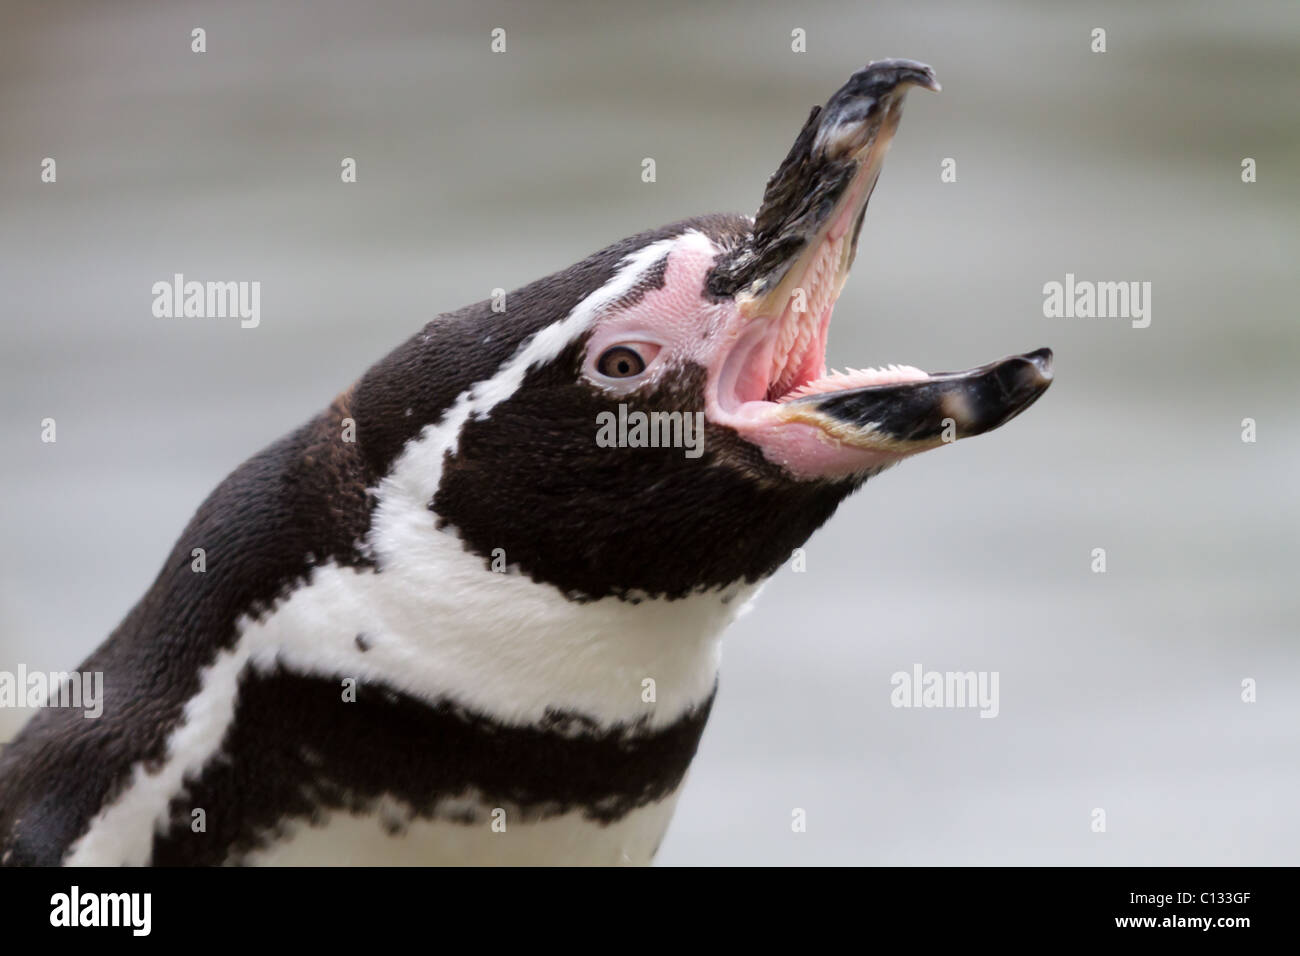 Penguin with opened mouth